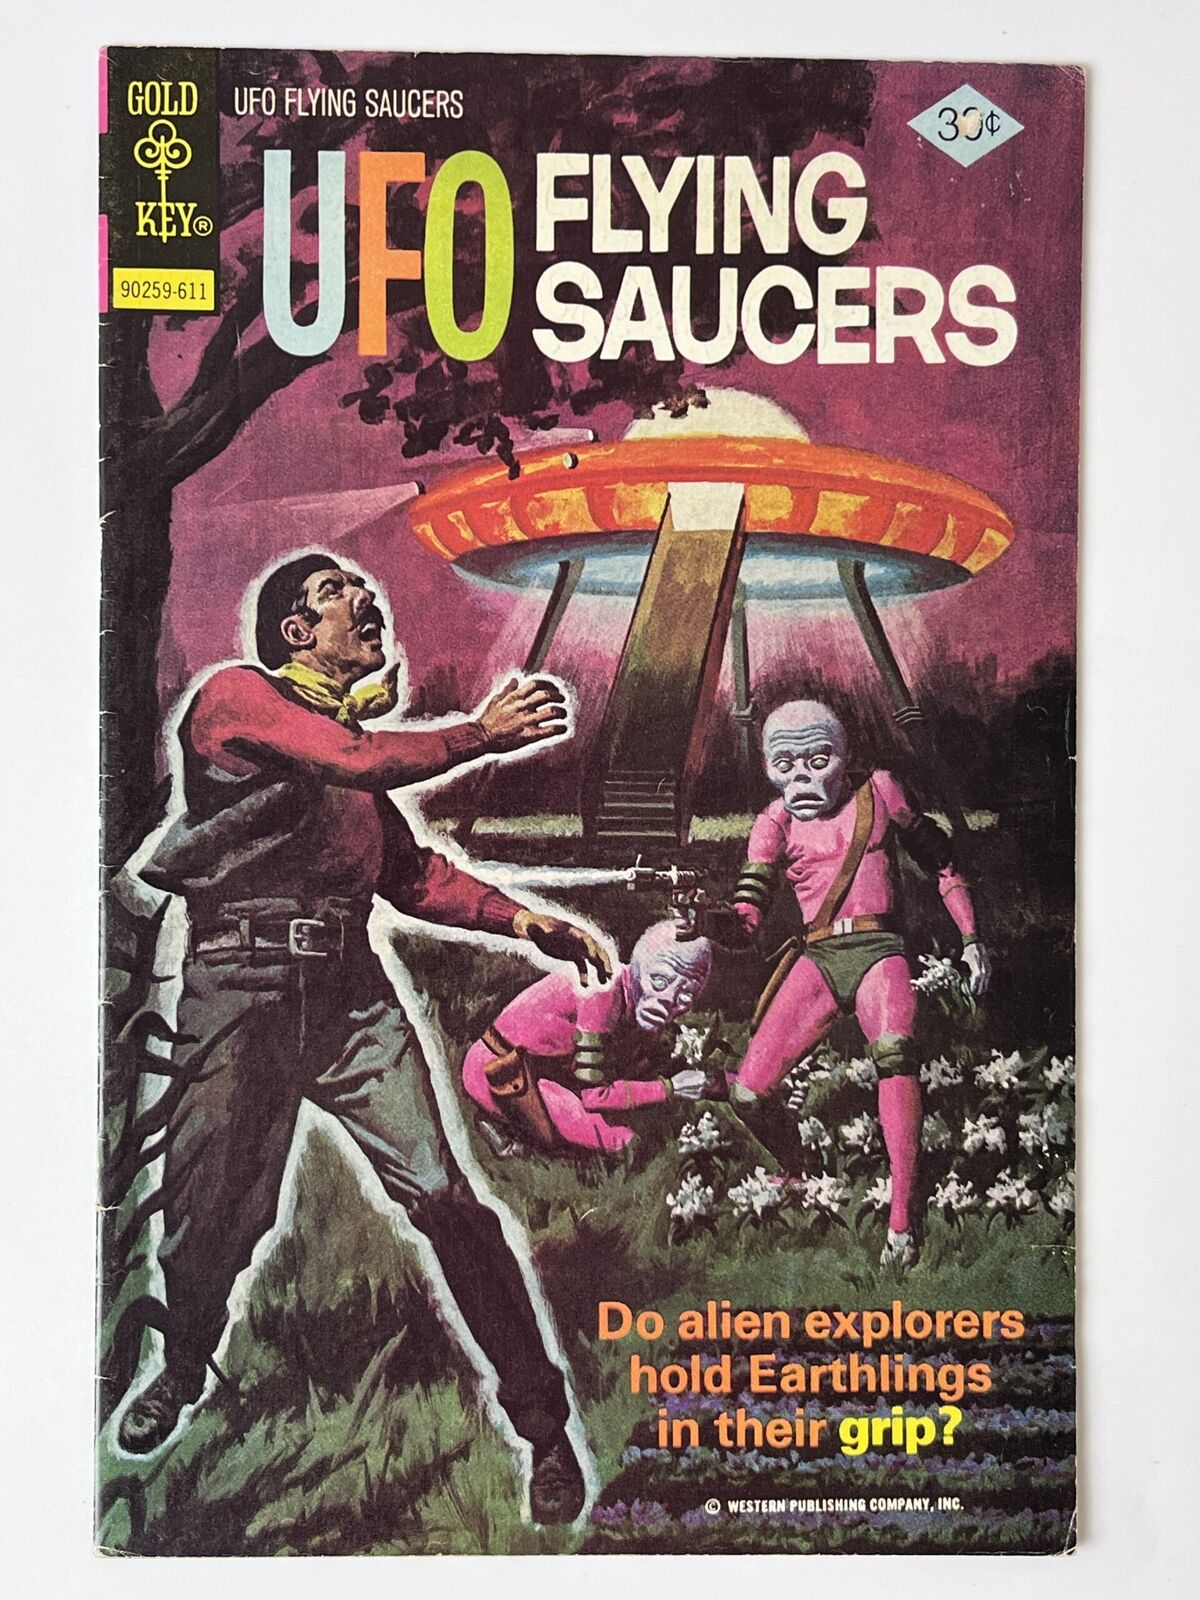 UFO Flying Saucers #12 (1976) in 5.0 Very Good/Fine